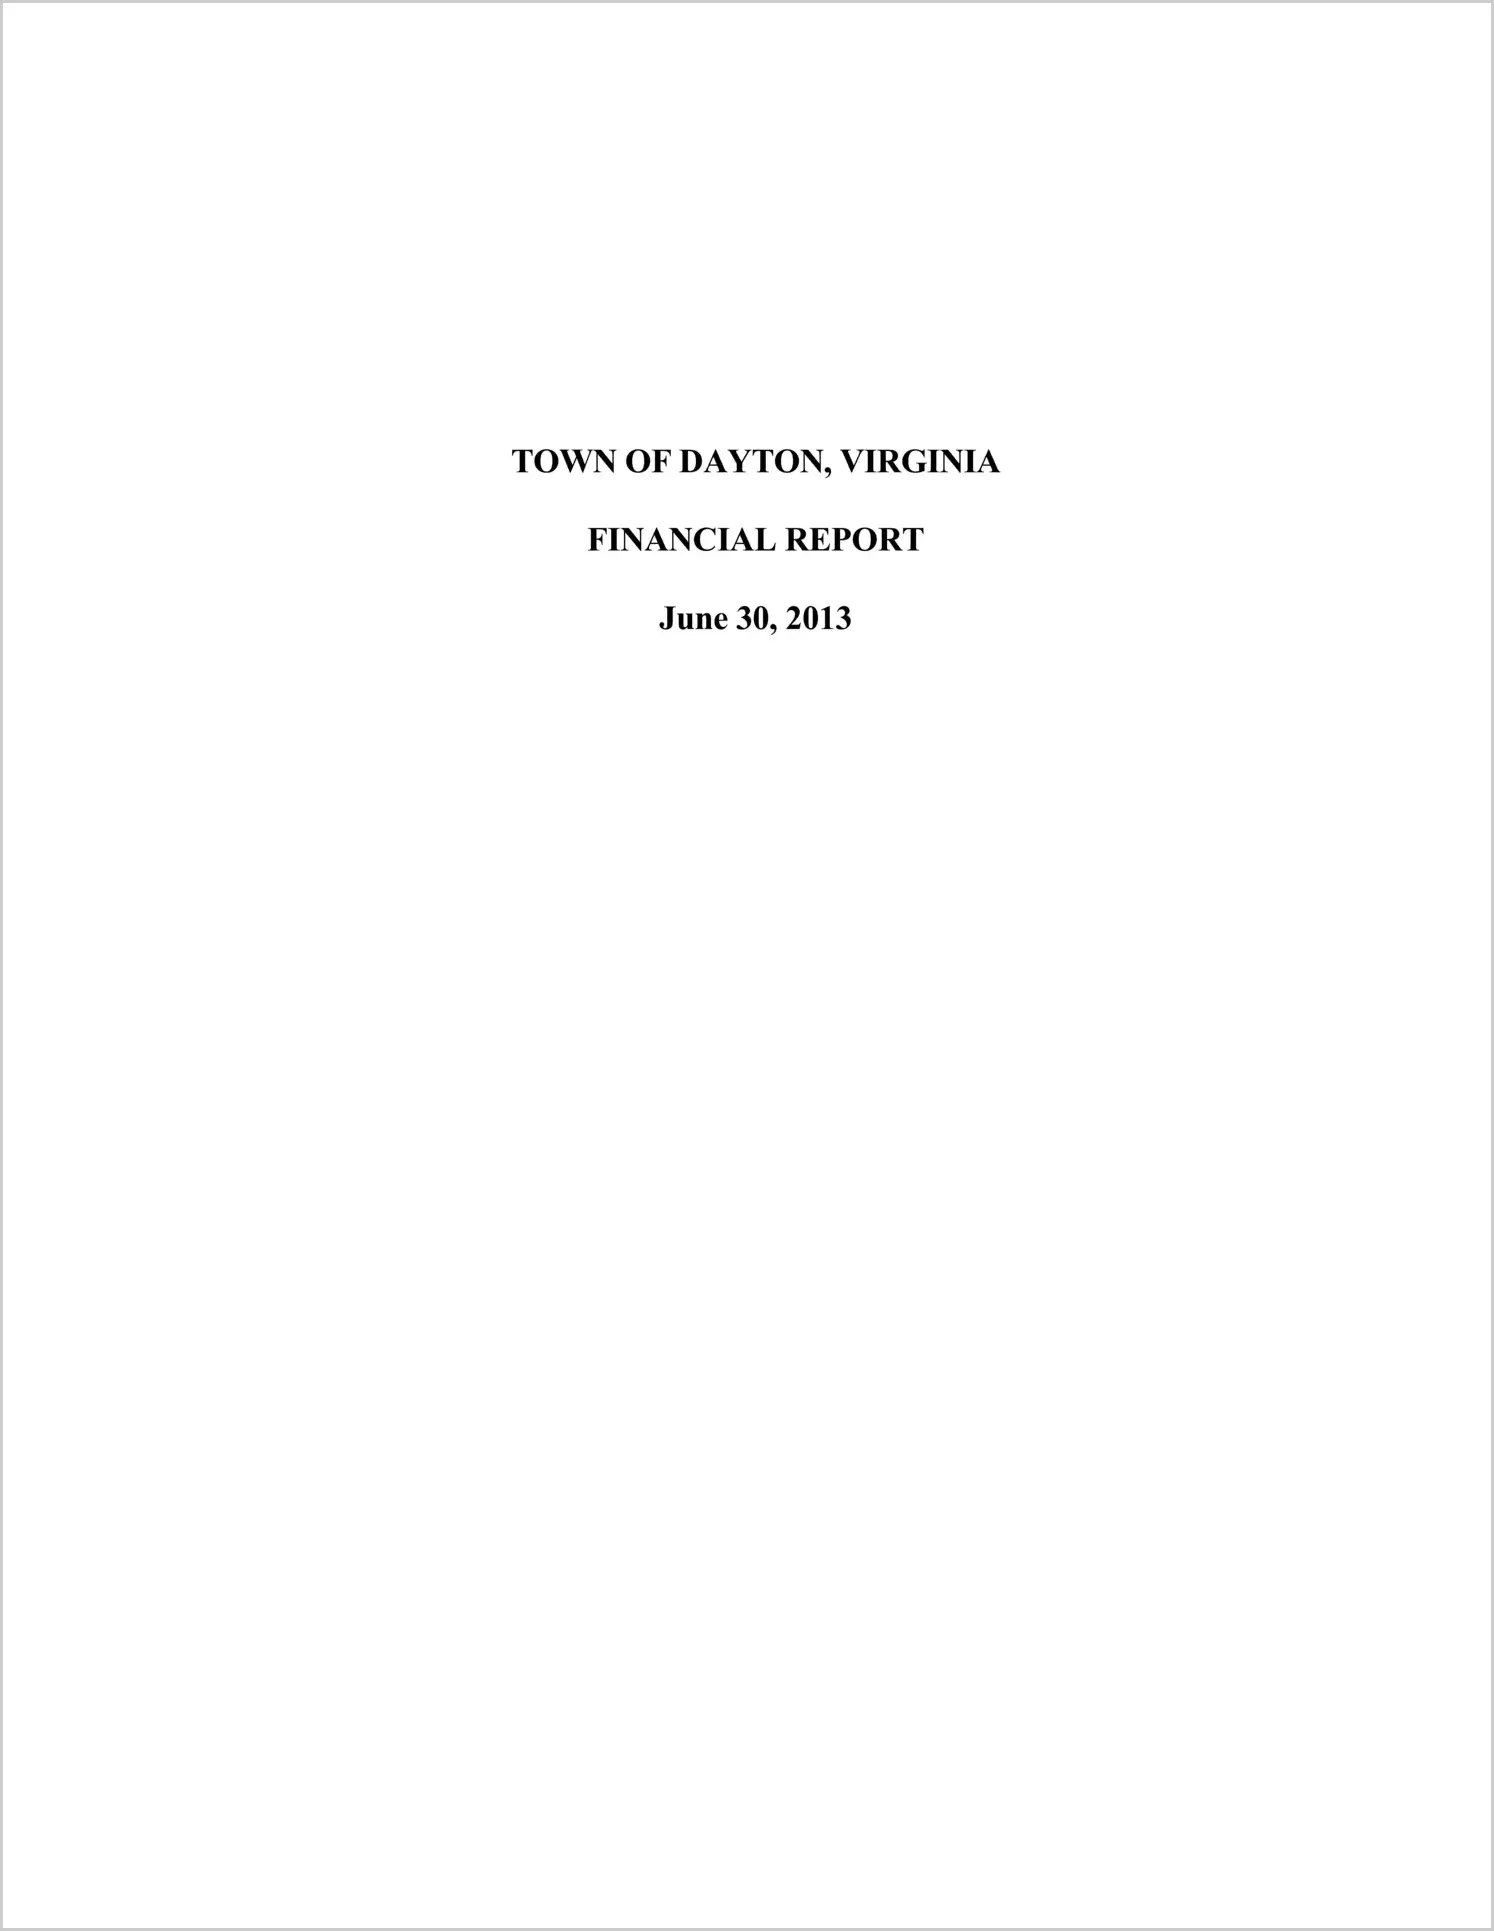 2013 Annual Financial Report for Town of Dayton